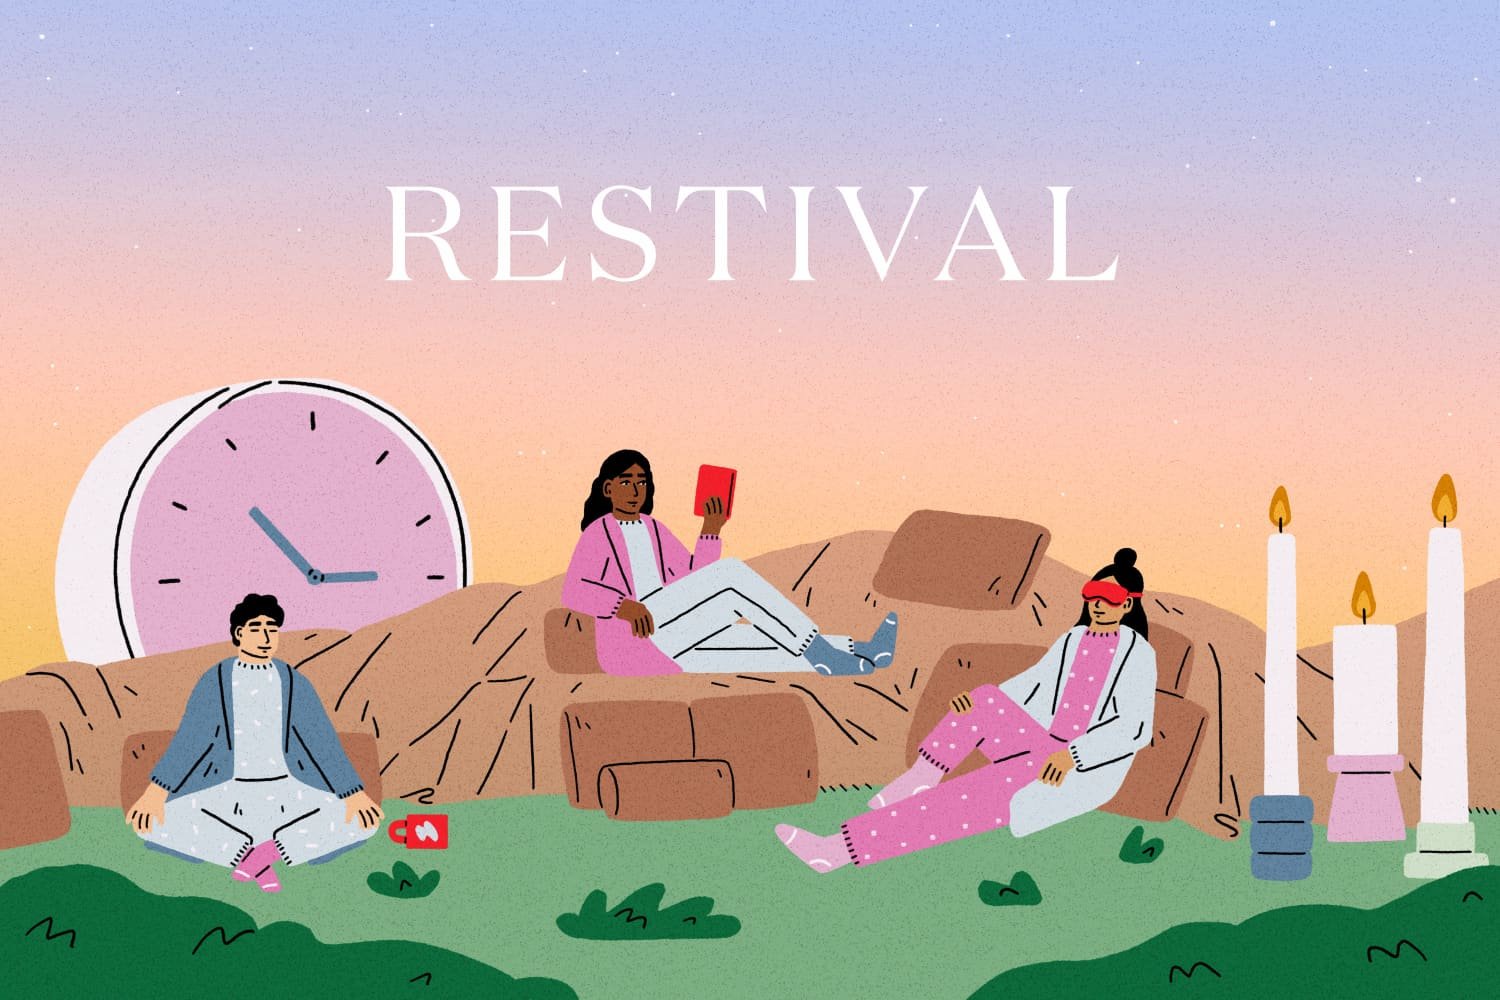 Welcome to Restival Season, Where Relaxing Is the Main Event - cover